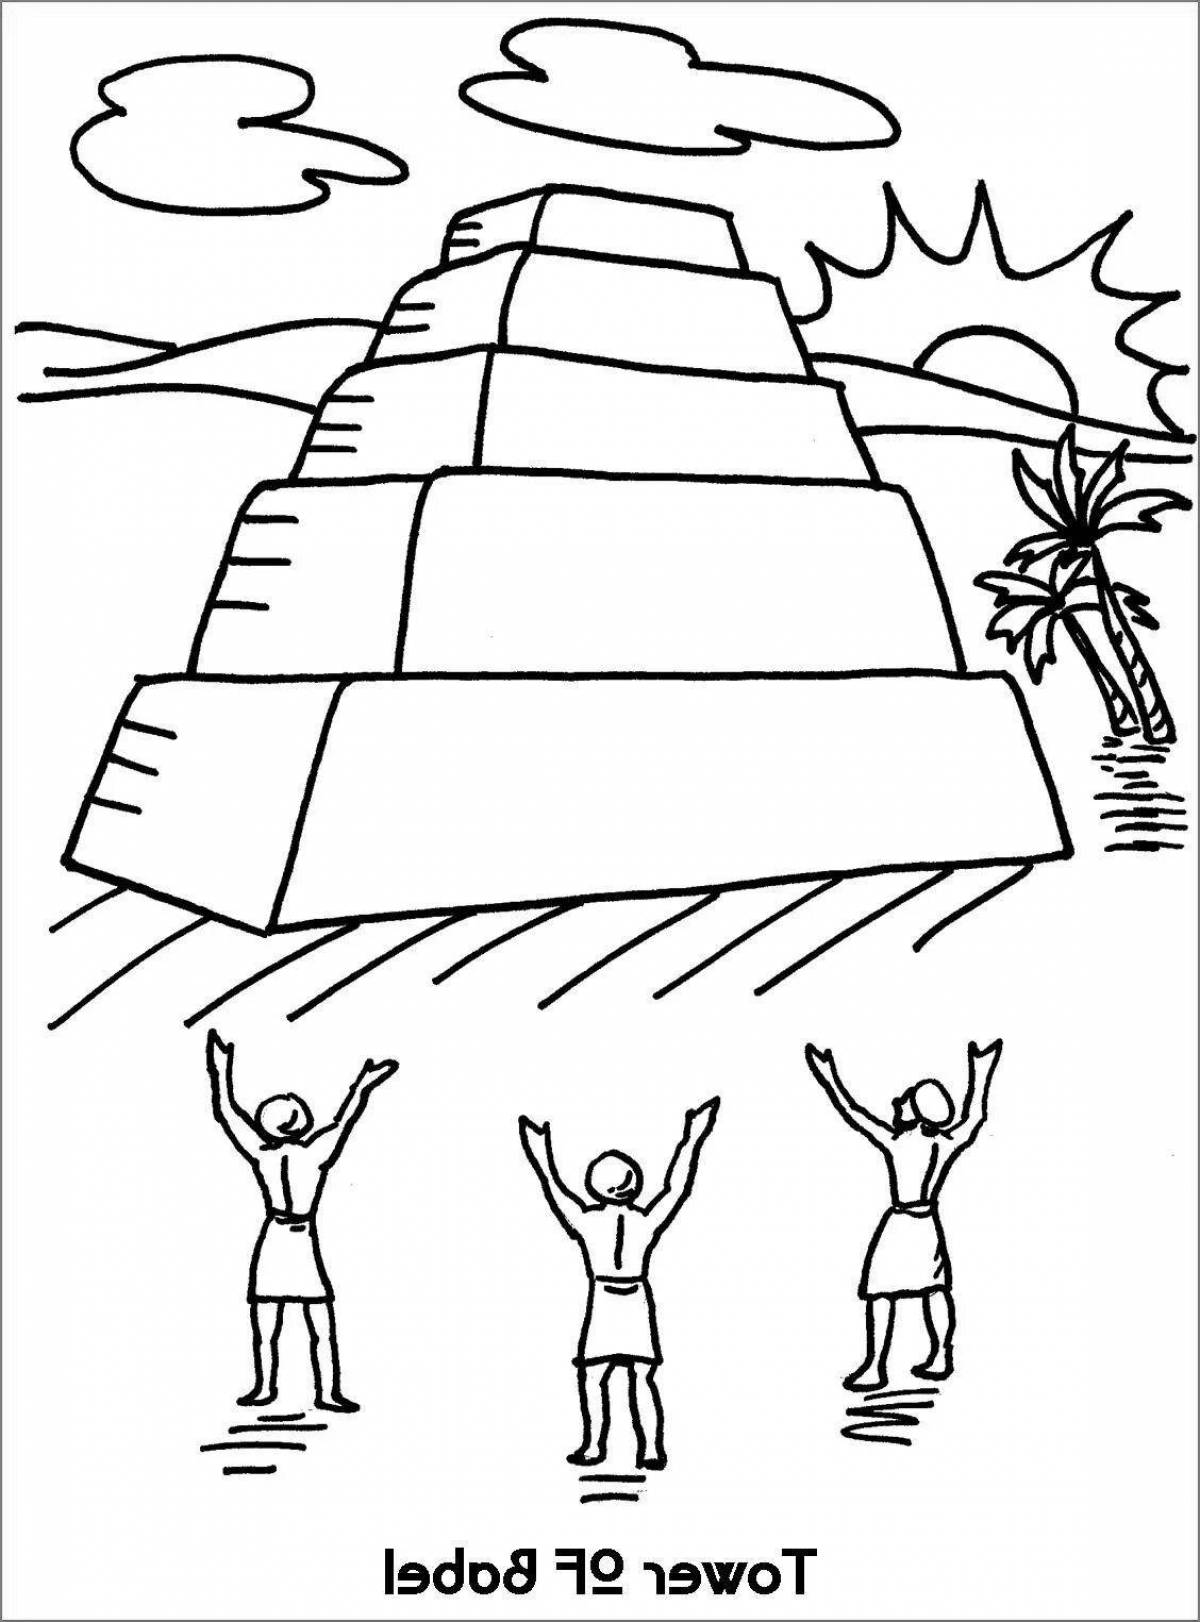 Famous tower of babel coloring page